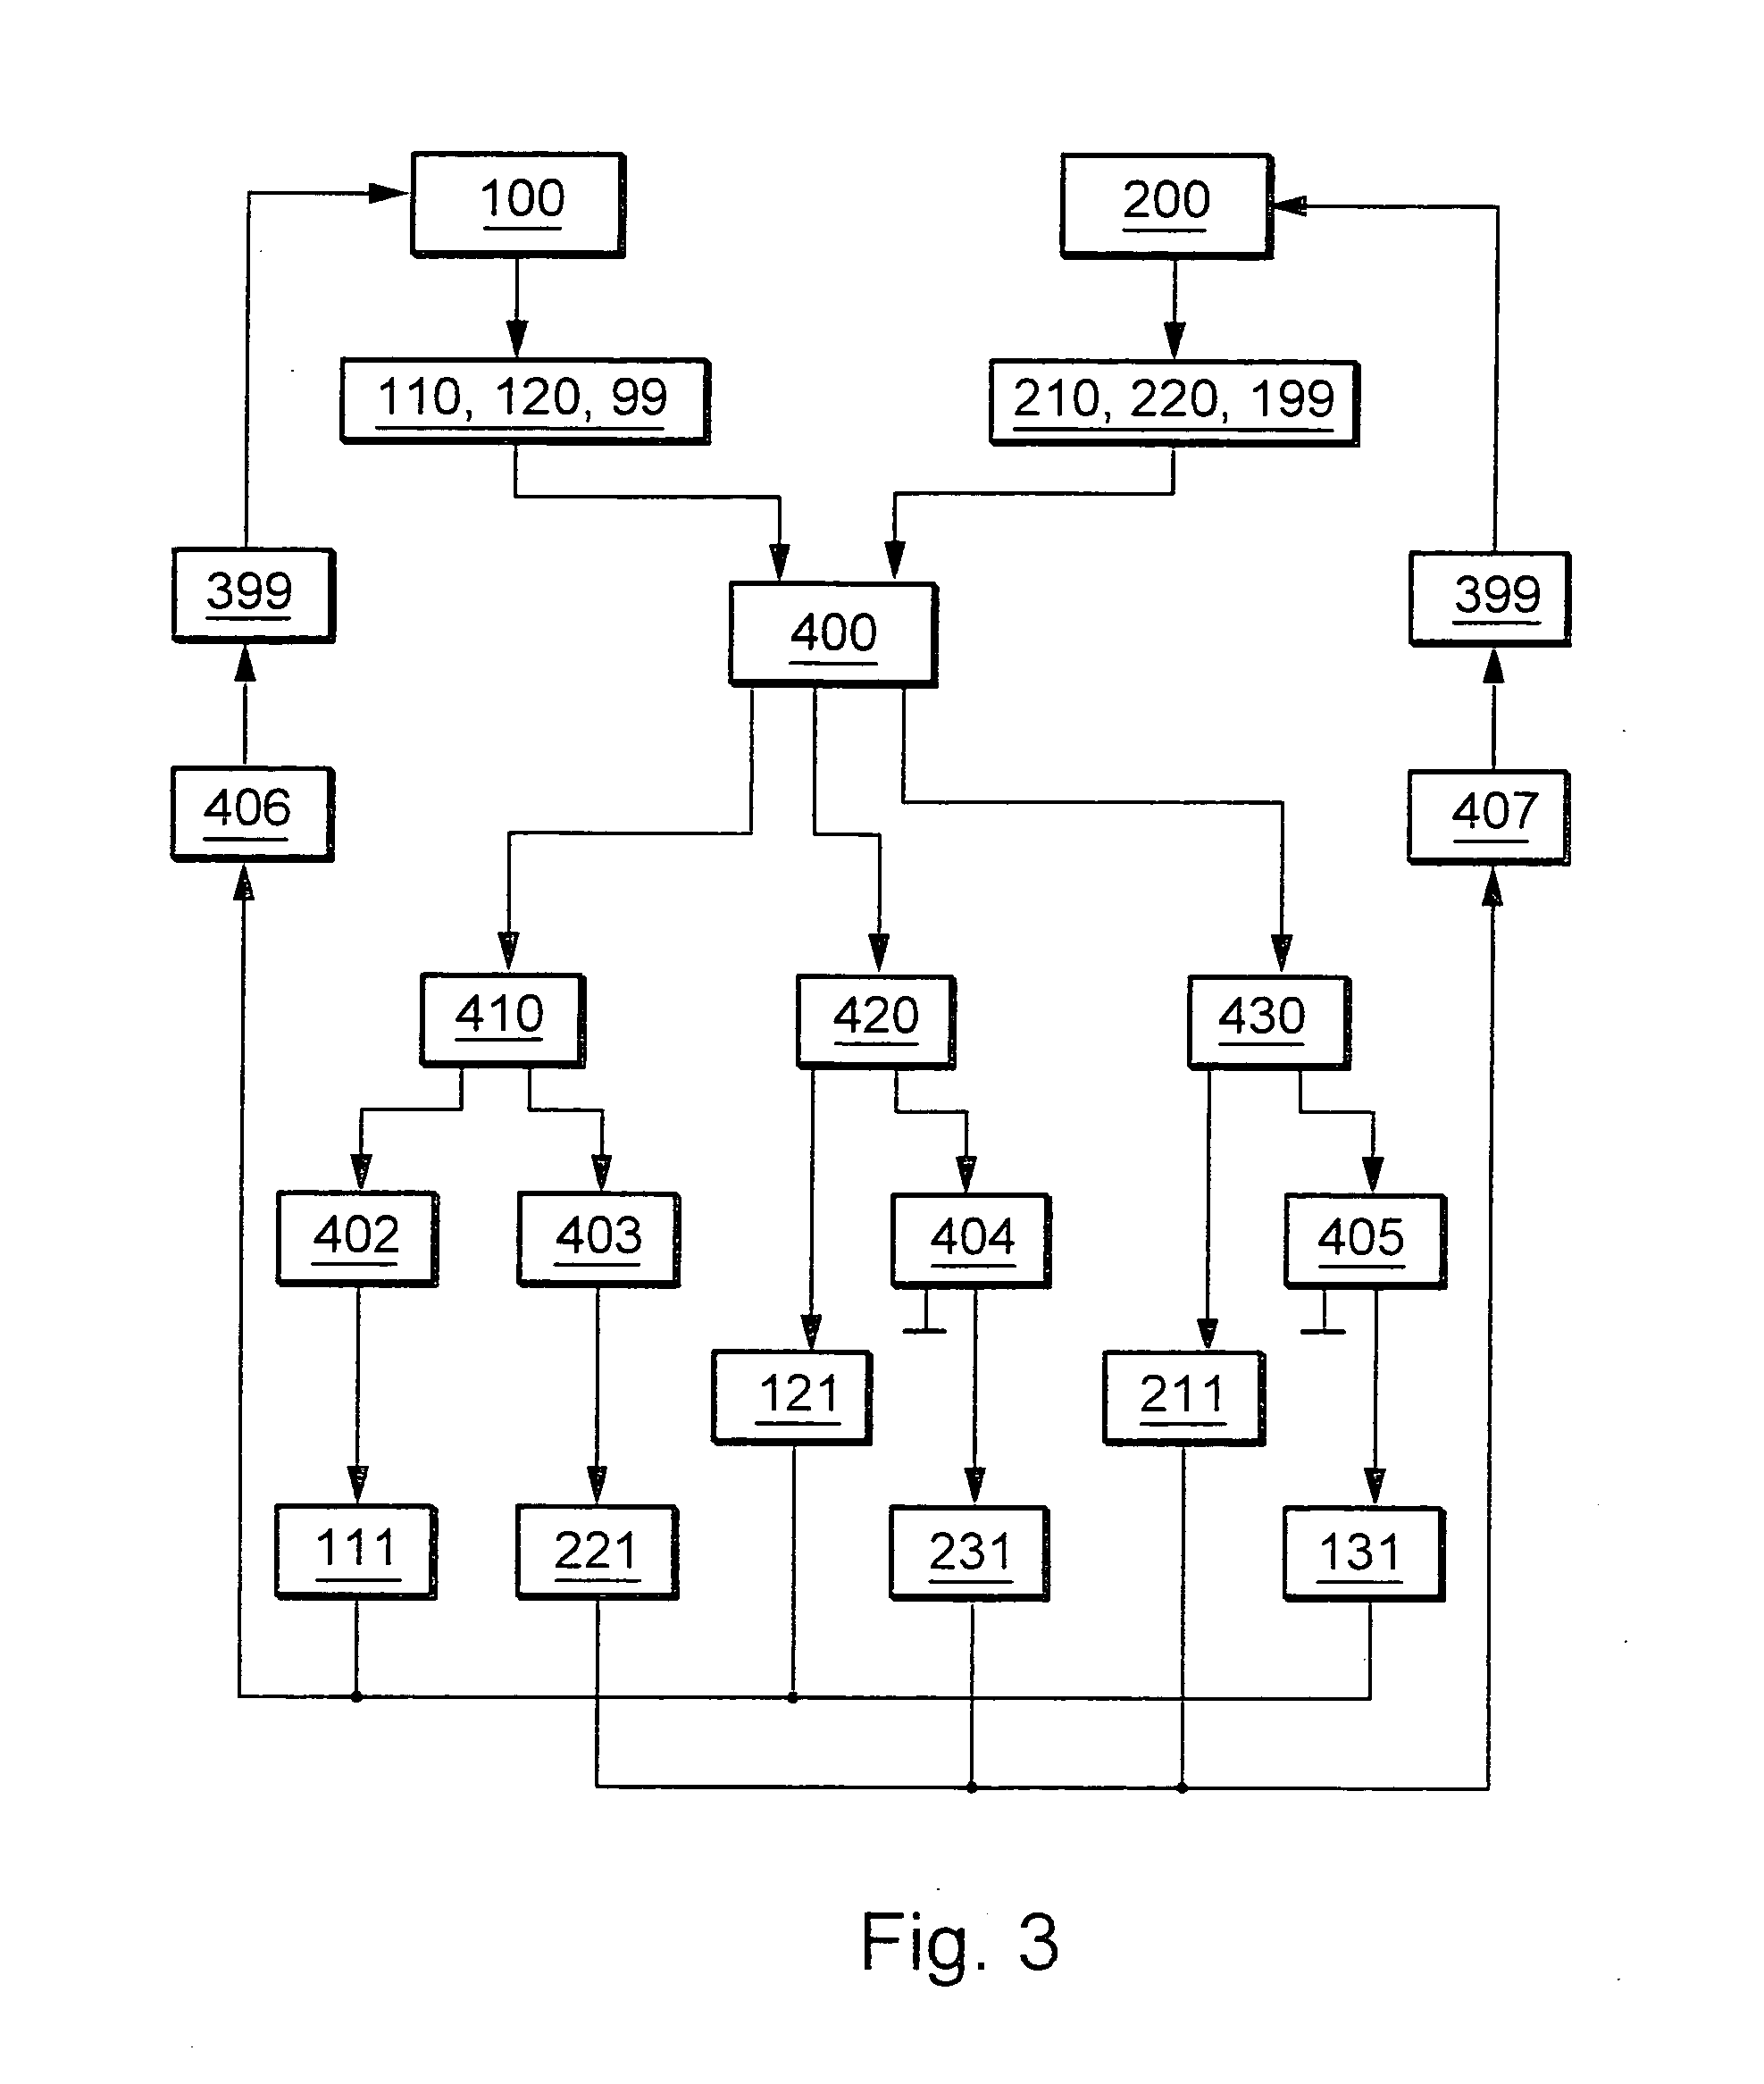 Method and device for data exchange and processing